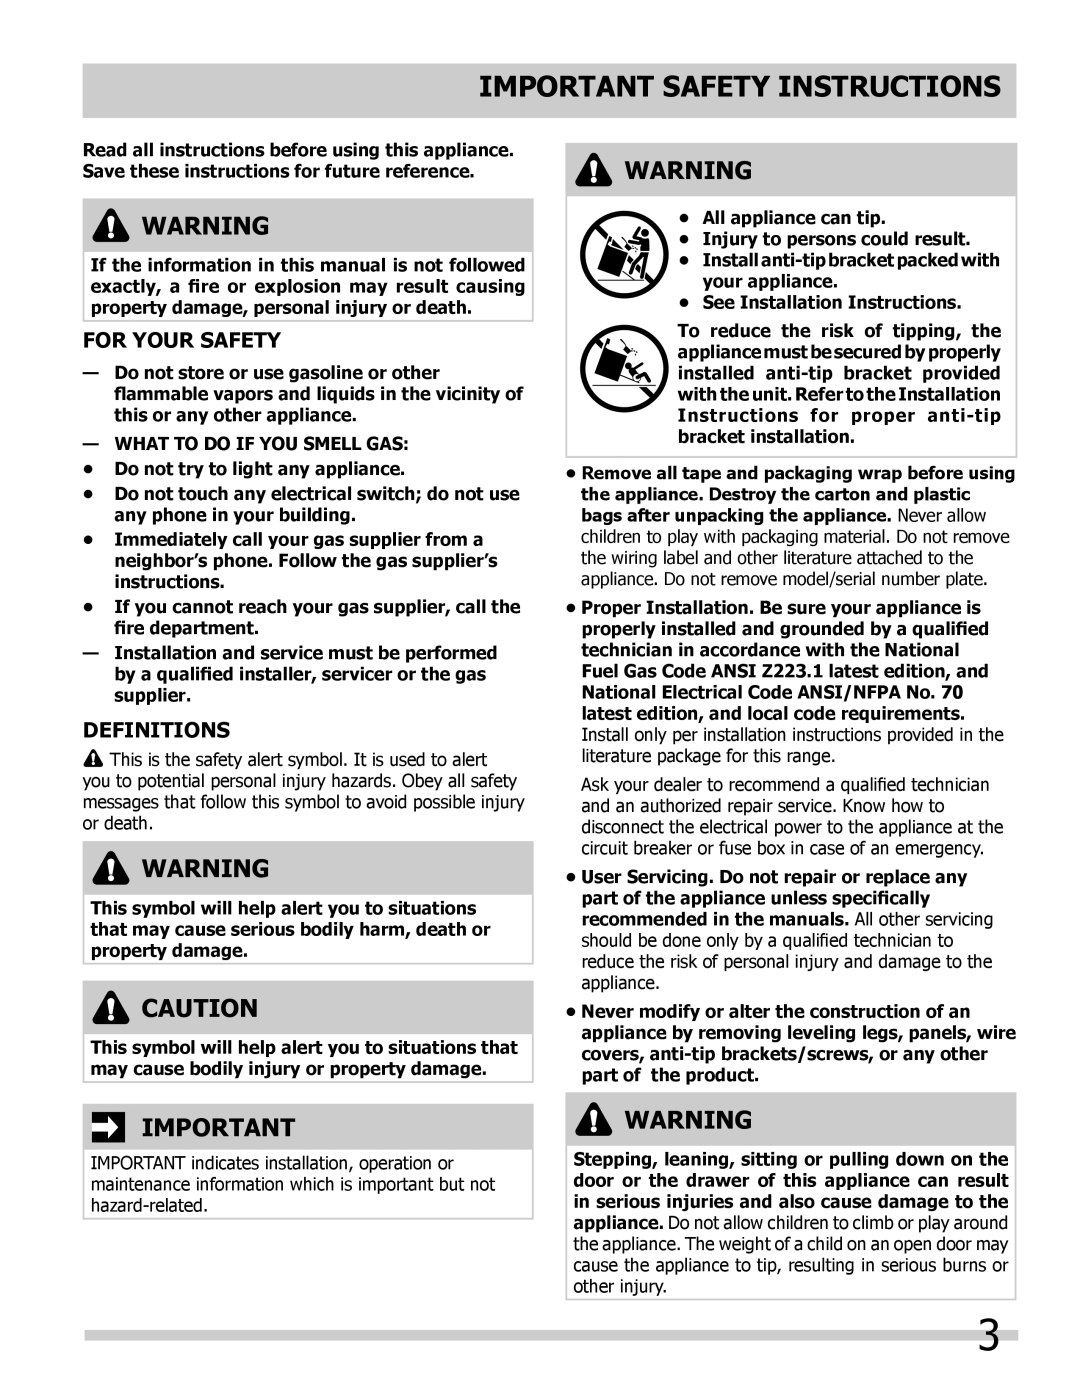 Frigidaire FPDS3085KF Important Safety Instructions, For Your Safety, Definitions, Do not store or use gasoline or other 